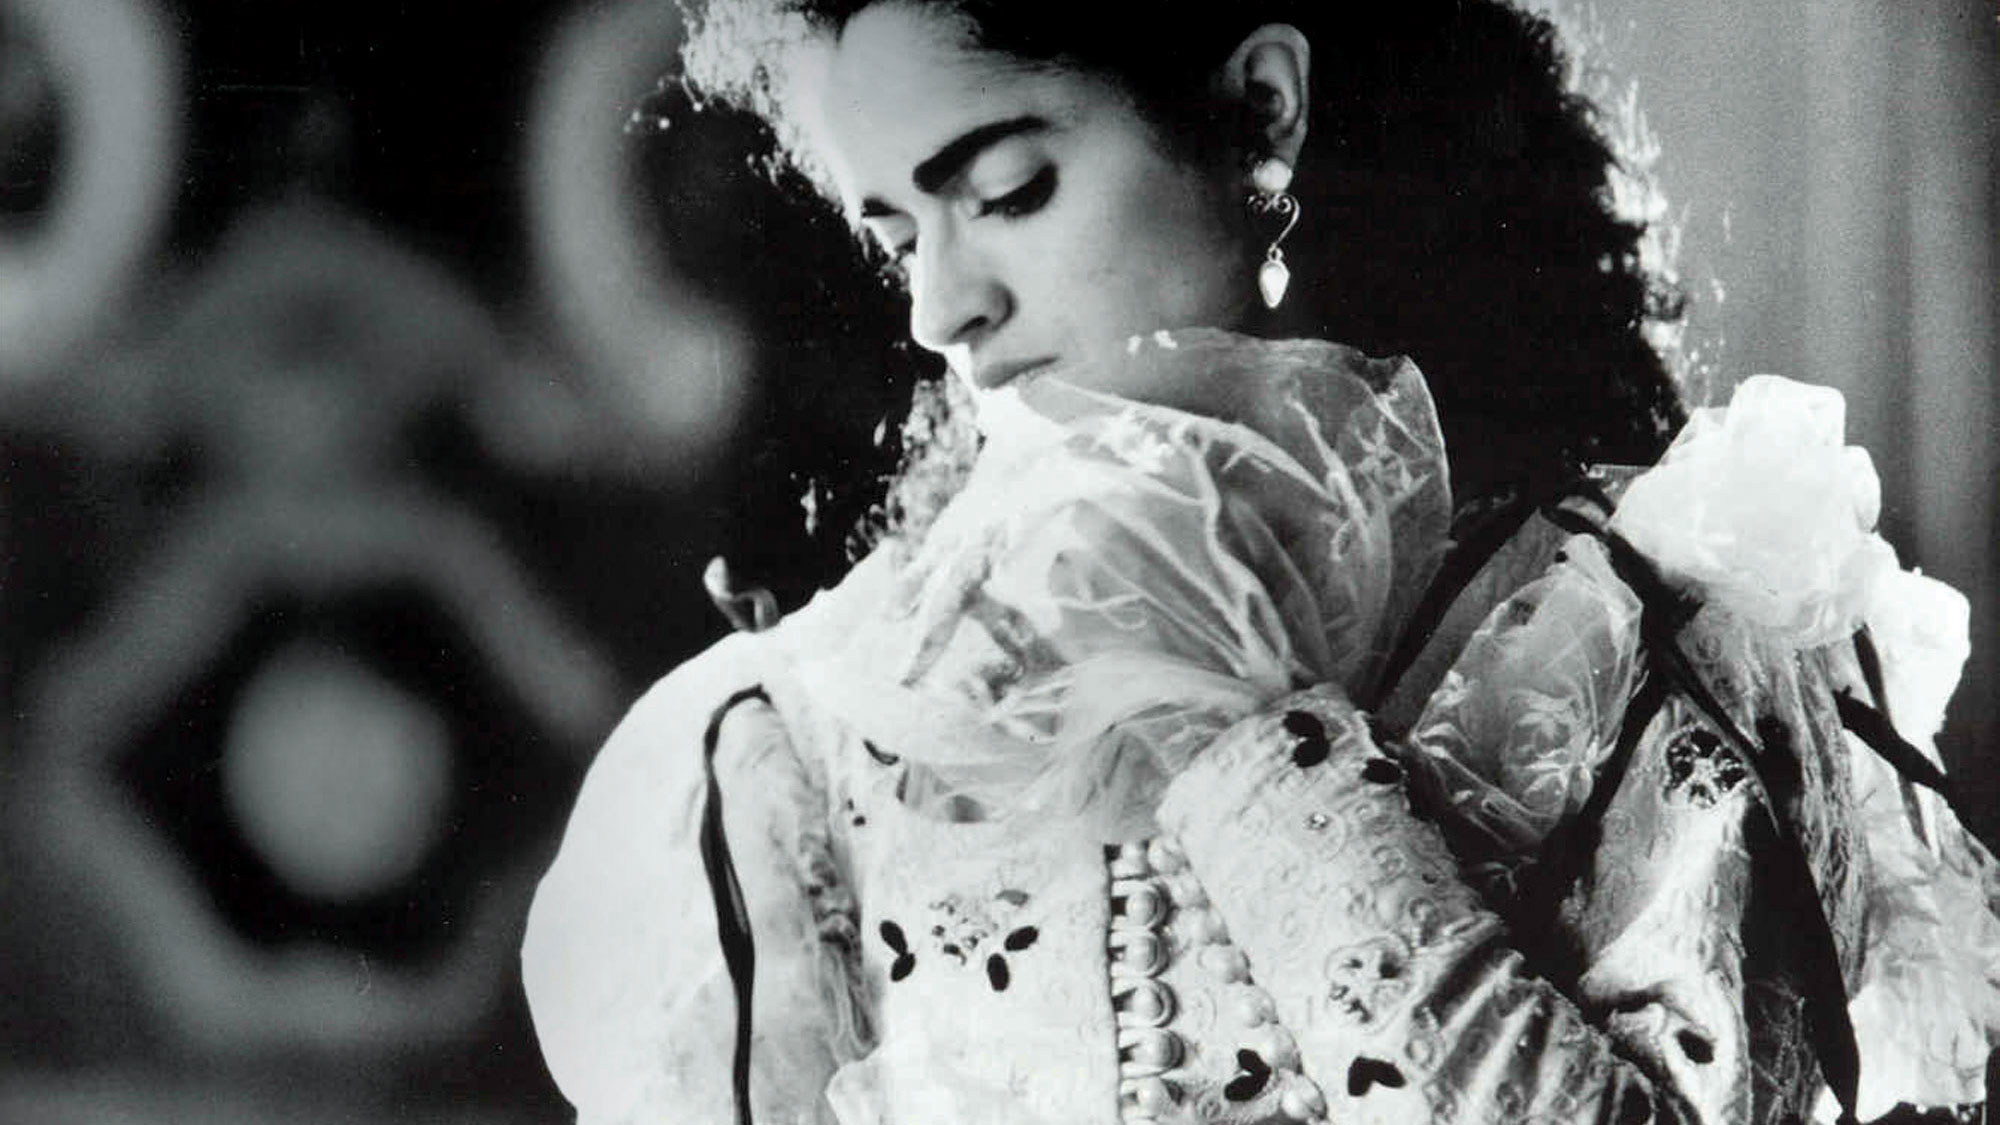 A woman wearing an ornate white dress with puffy sleeves and organza flares coming out of the bottom of the sleeve looking down over her shoulder dramatically. 